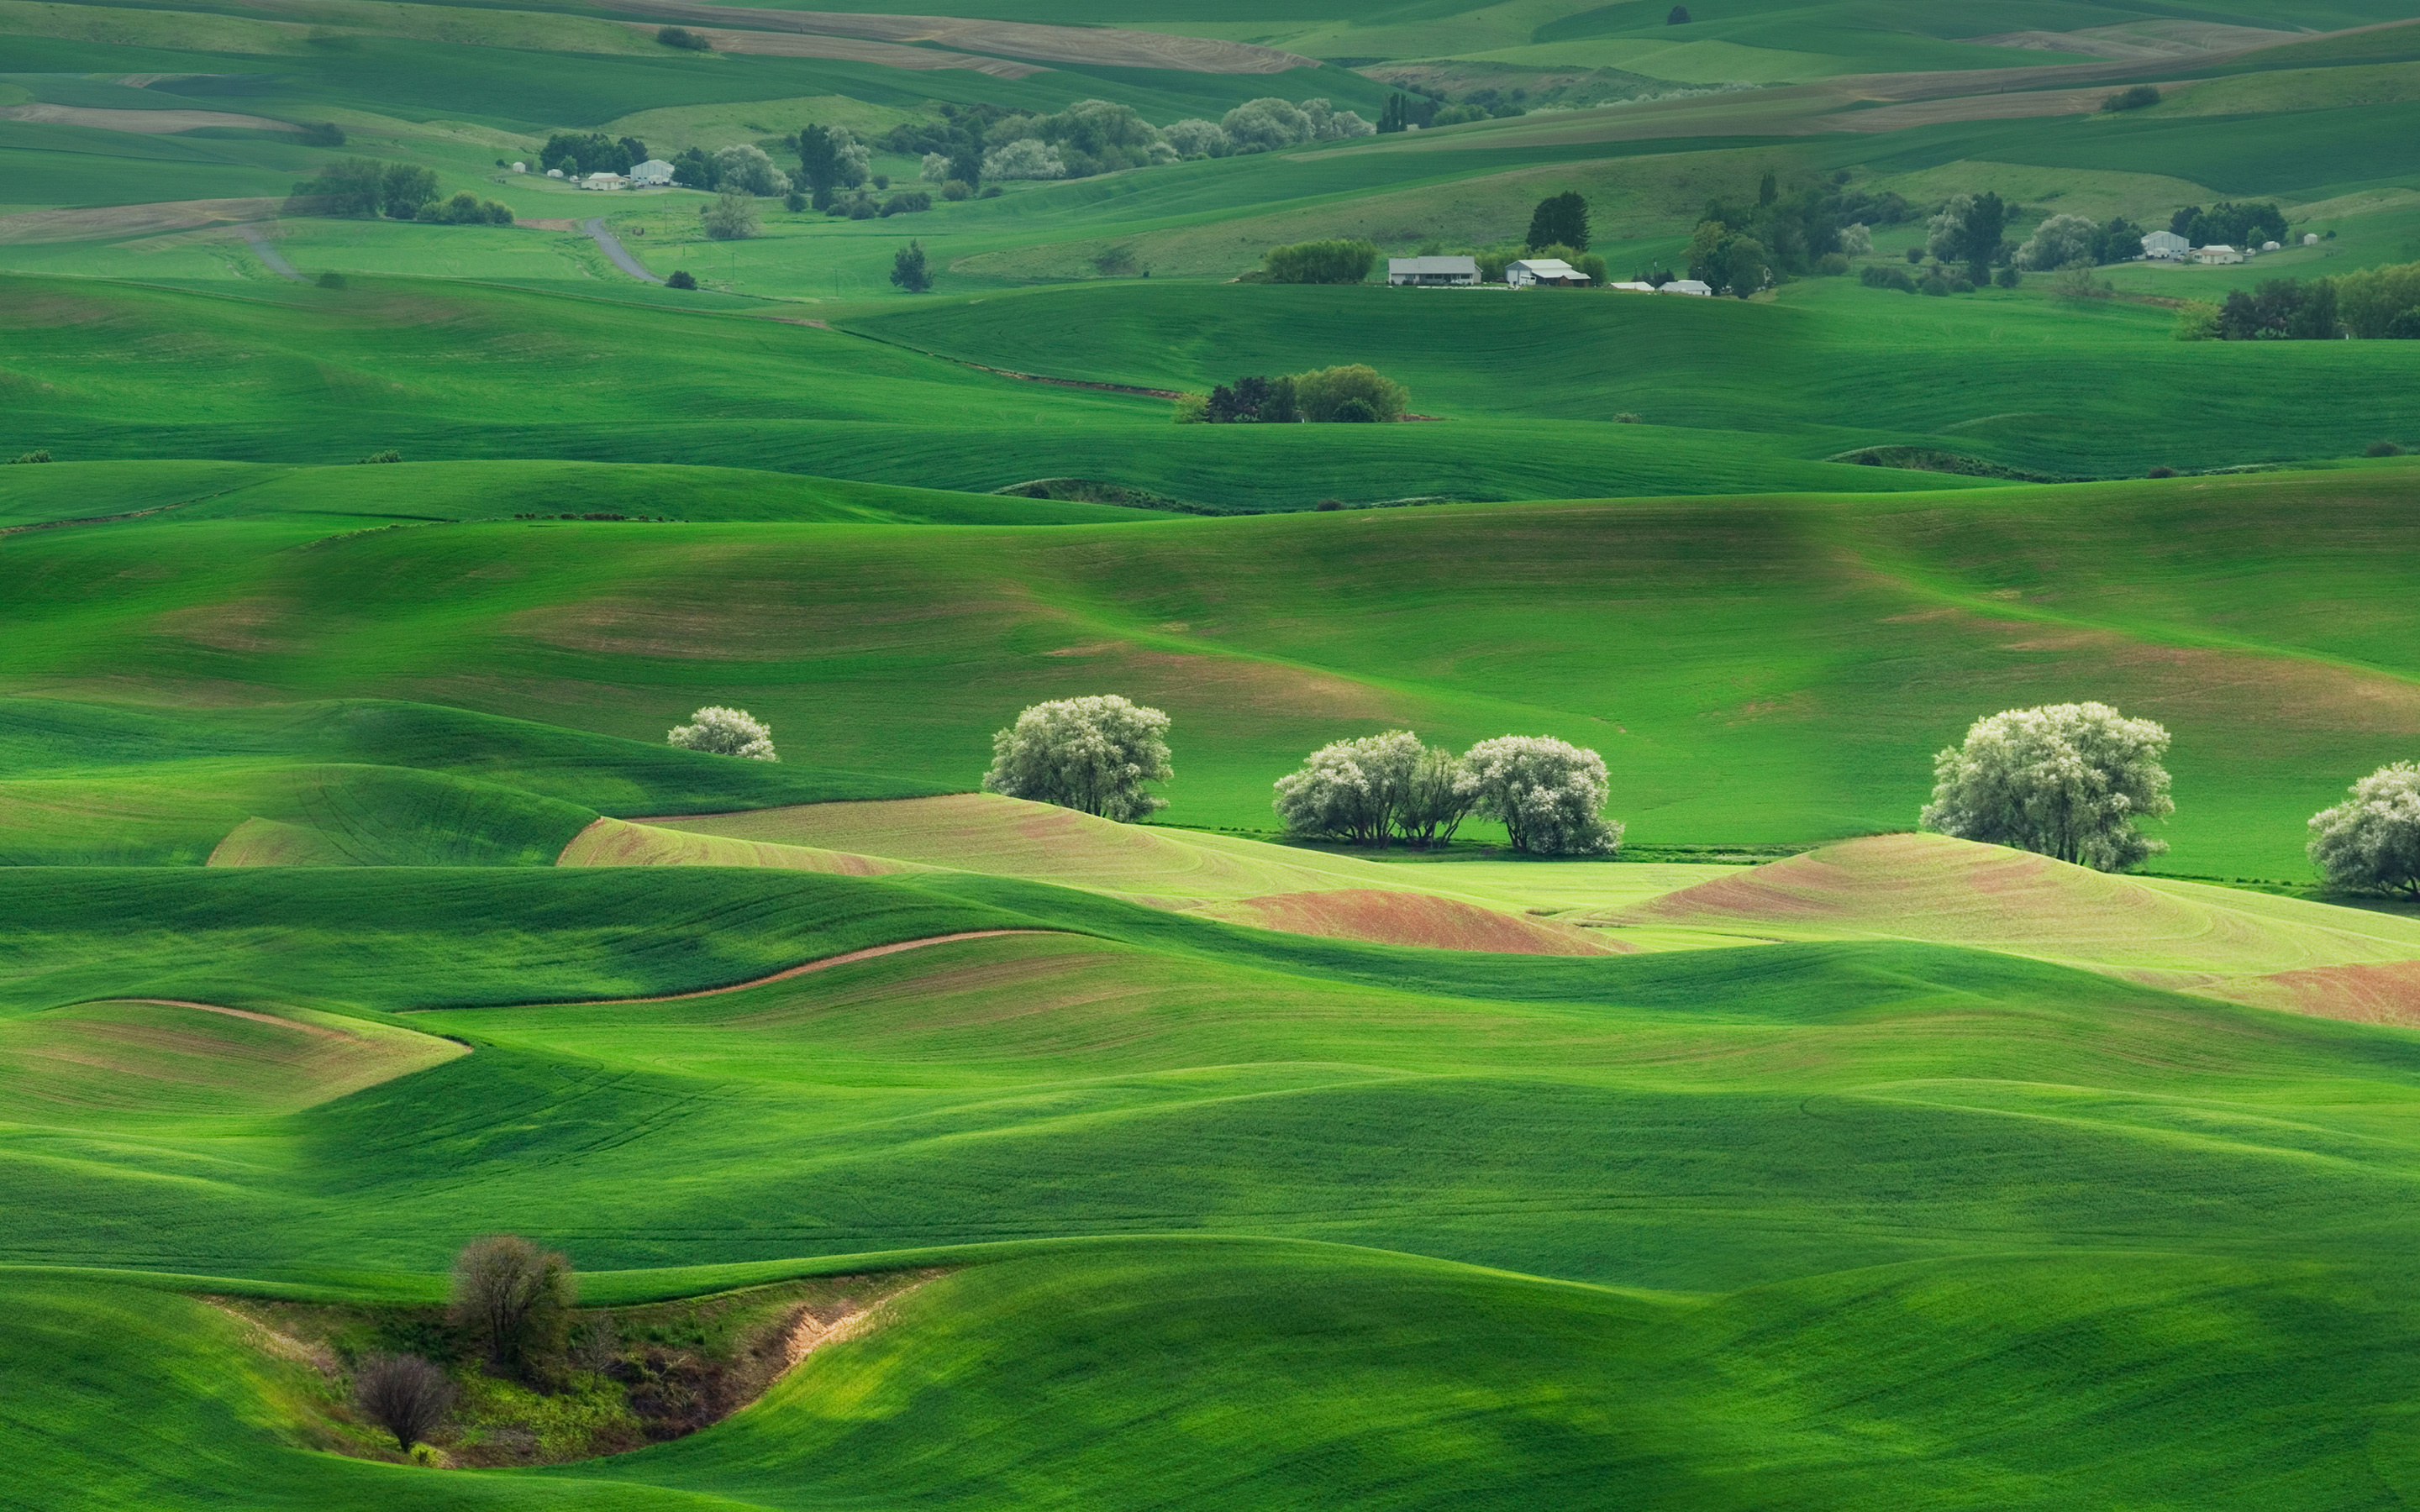 Grassland: On the open air, Serenity, Platteland, Land topography, Natural features. 2880x1800 HD Wallpaper.